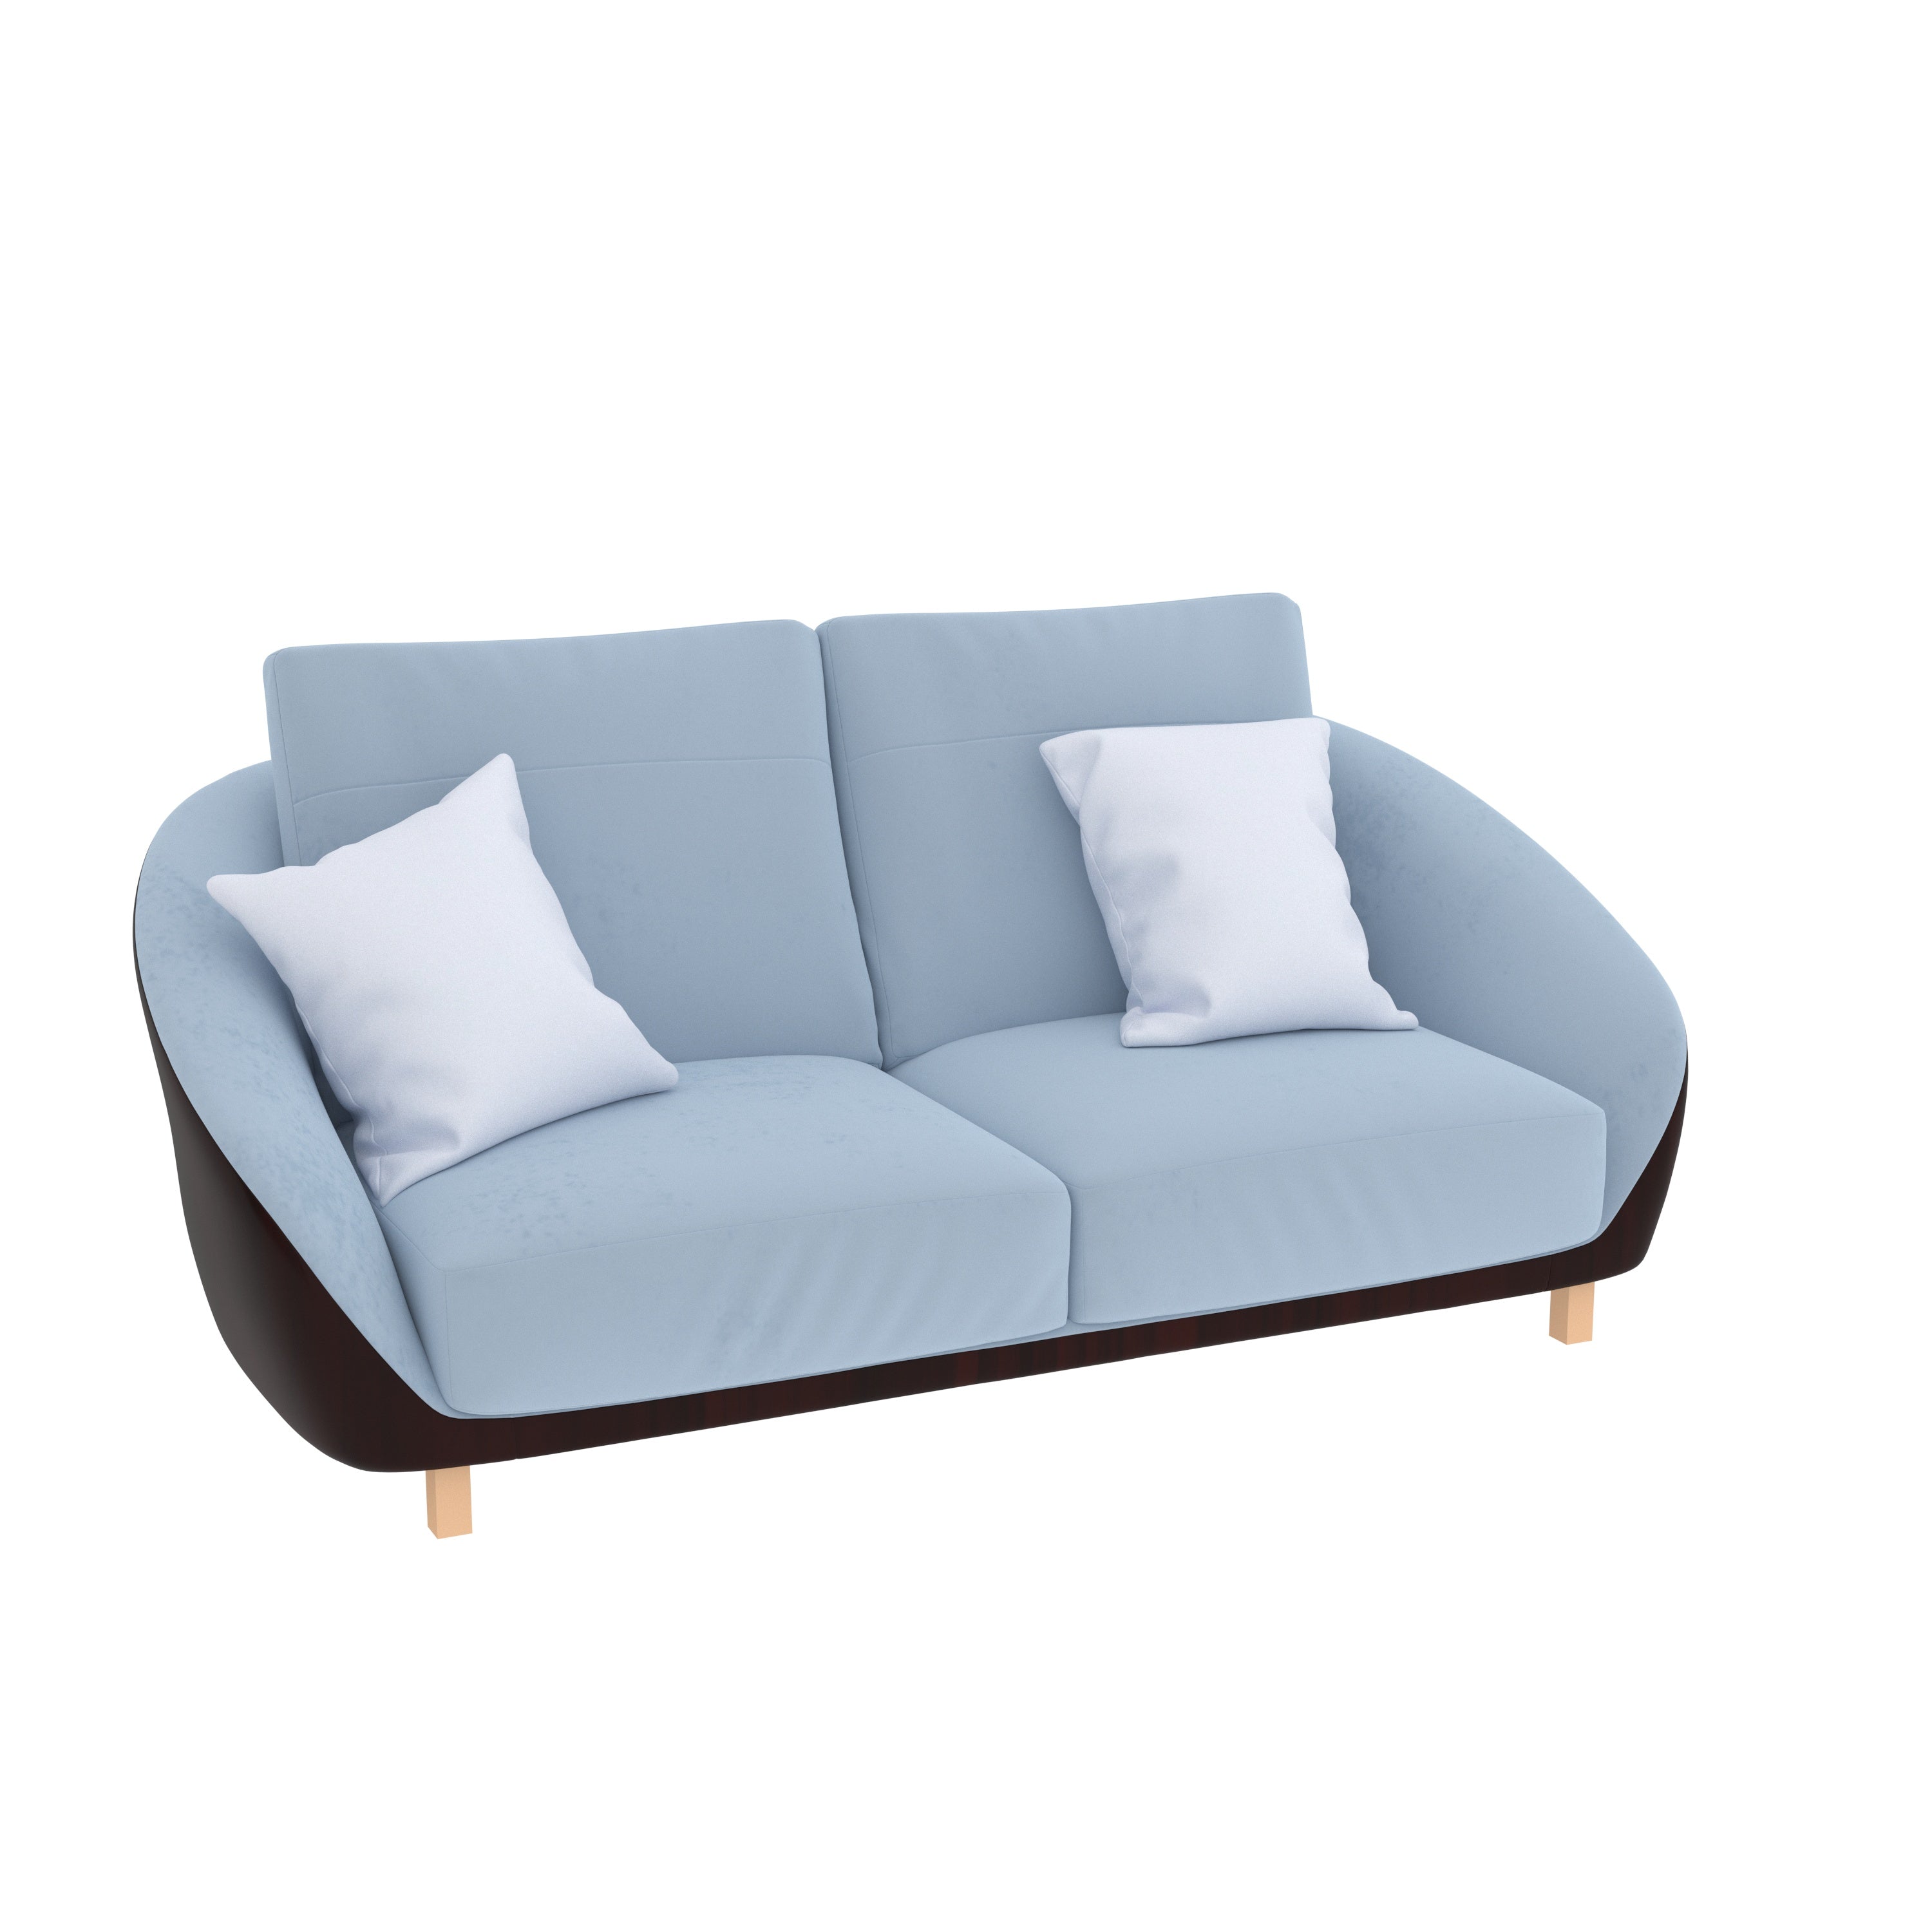 Air-Force Blue Smooth Finish Wooden 2 Seater Sofa Sofa